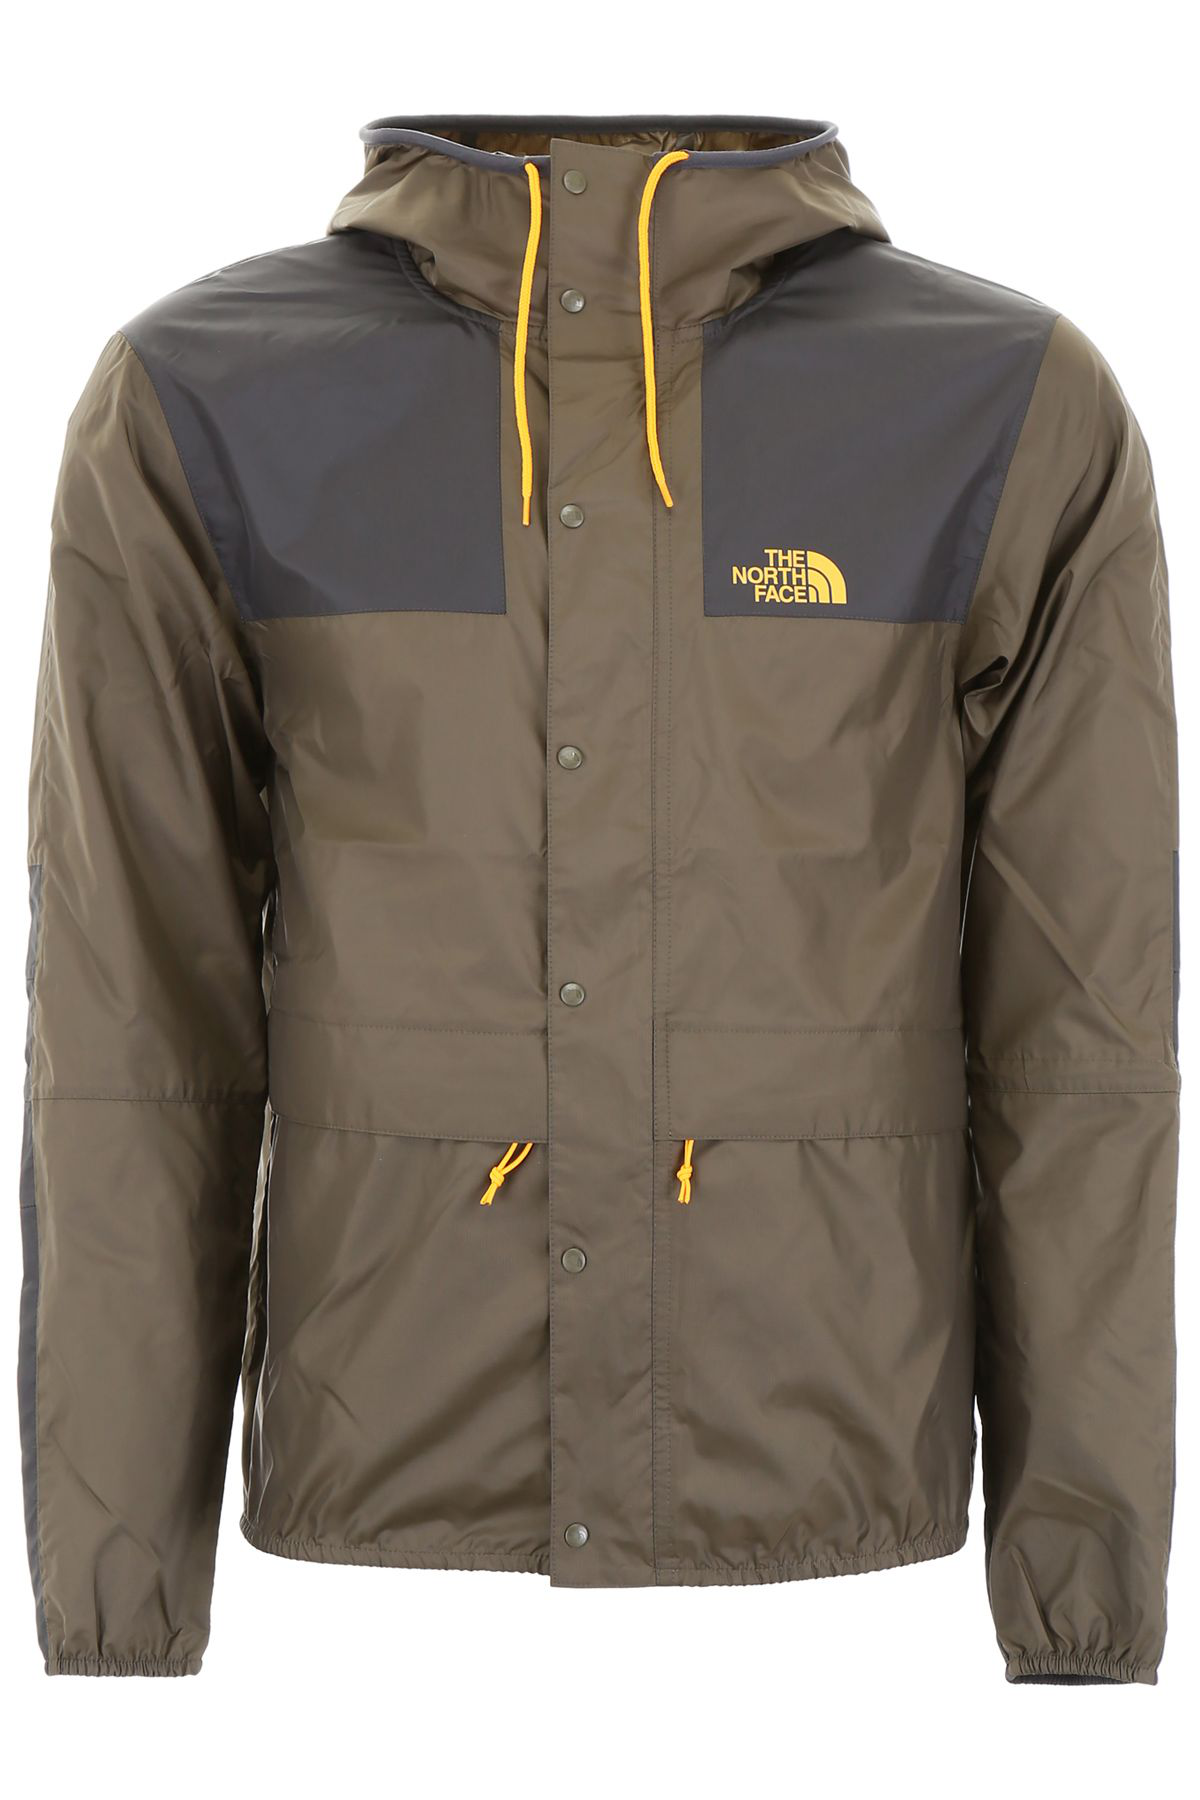 The North Face 1985 Seasonal Mountain Jacket Green on Sale, SAVE 55%.